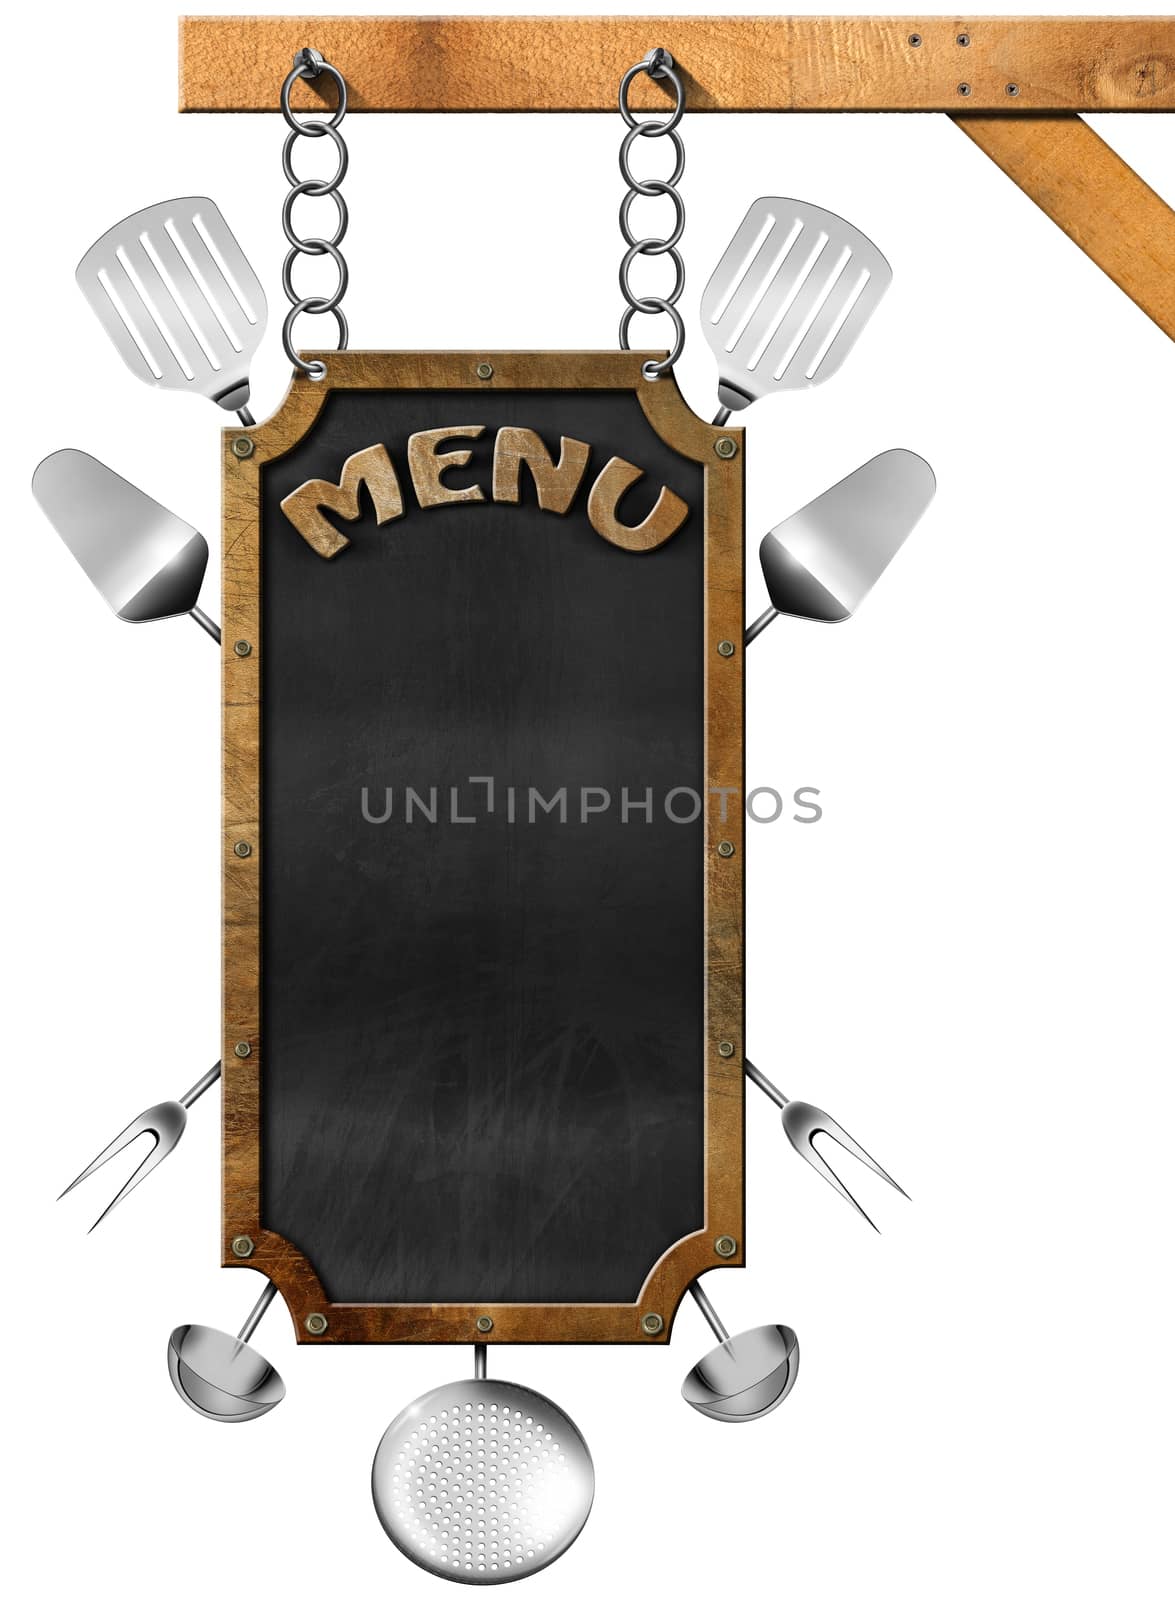 Empty blackboard with metallic frame, text menu and kitchen utensils hanging from a metal chain on a wooden pole and isolated on white background